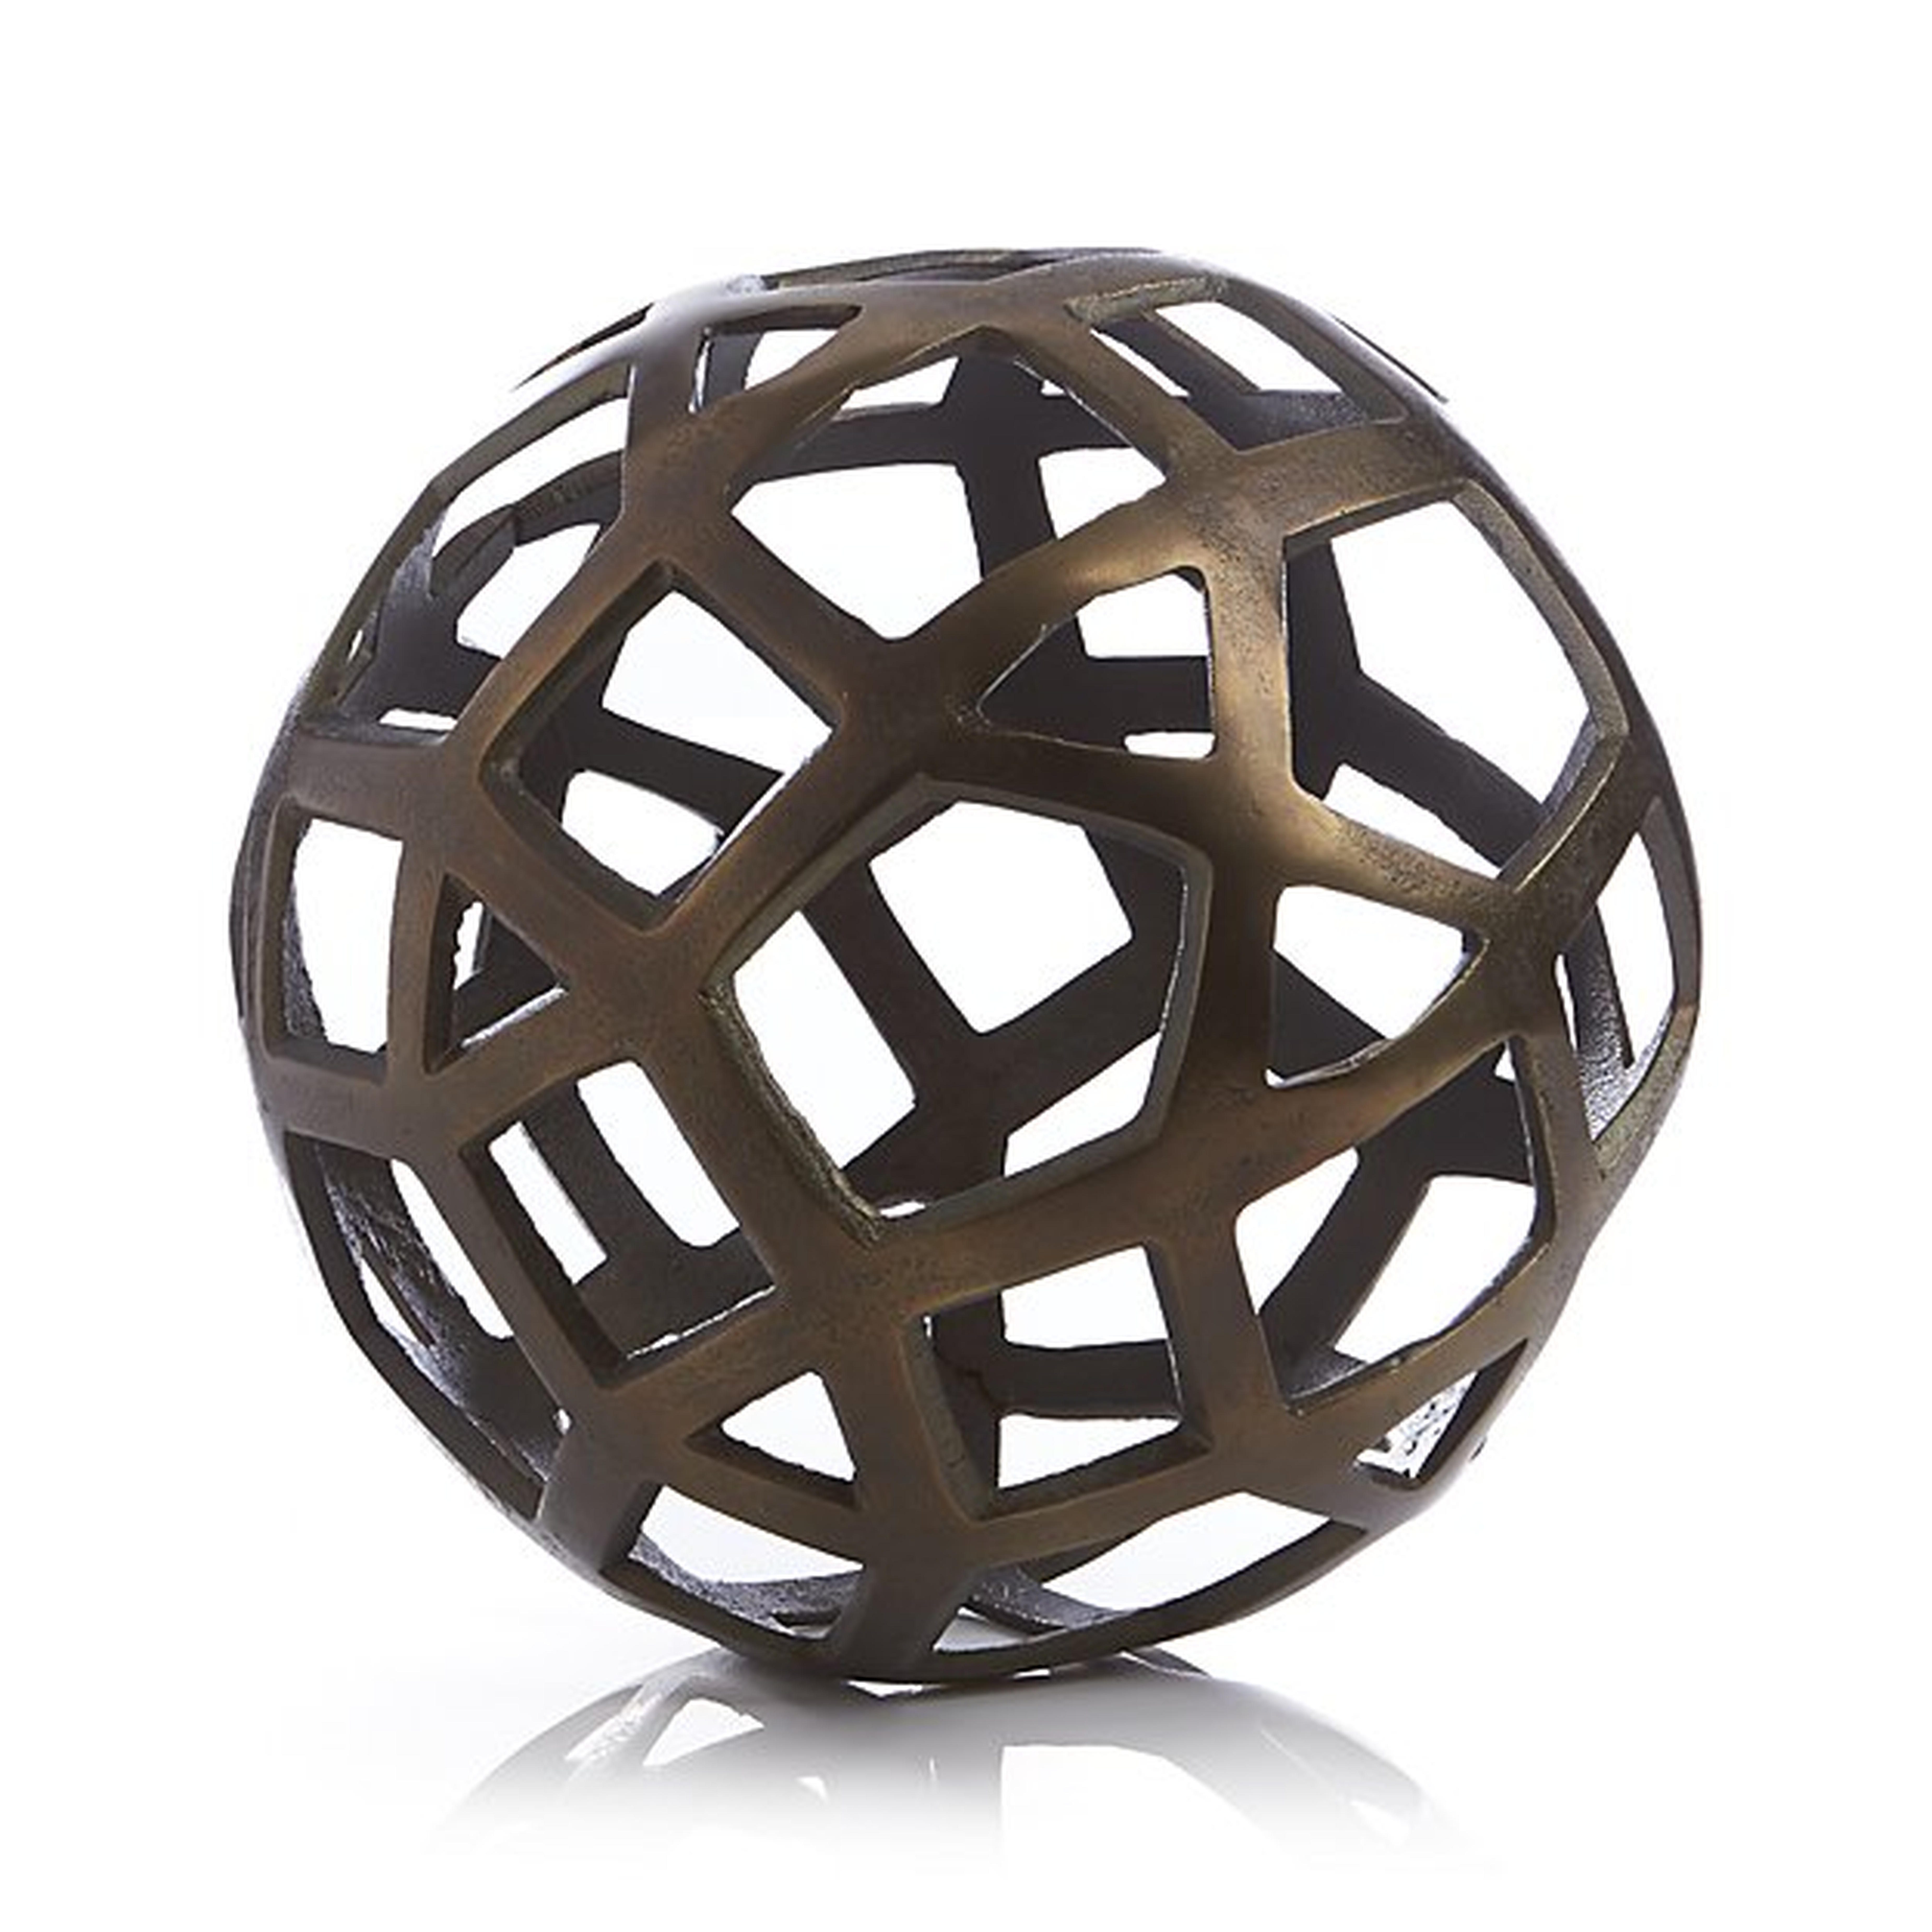 Geo small Decorative Metal Ball - Crate and Barrel